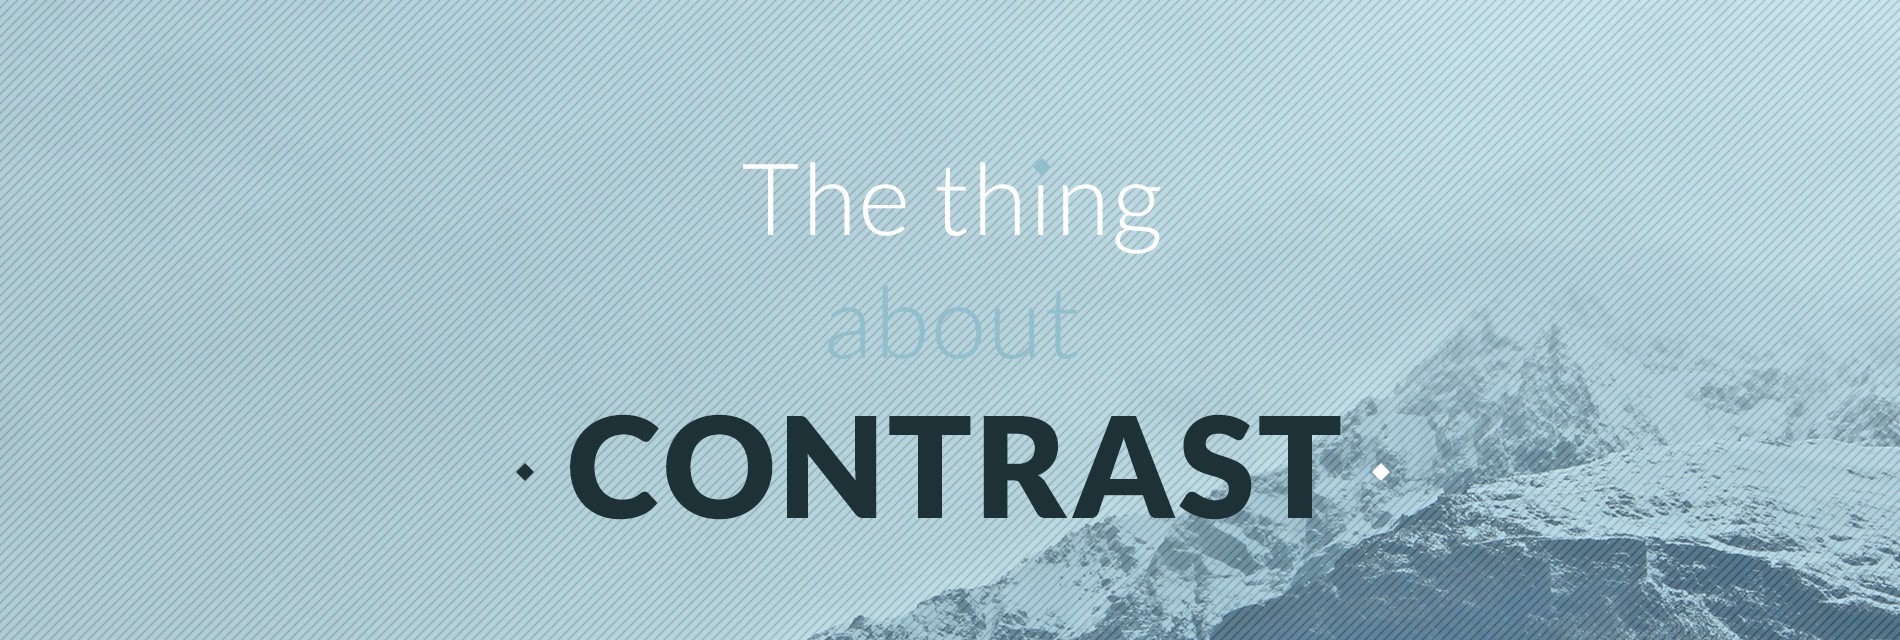 The Thing About Contrast